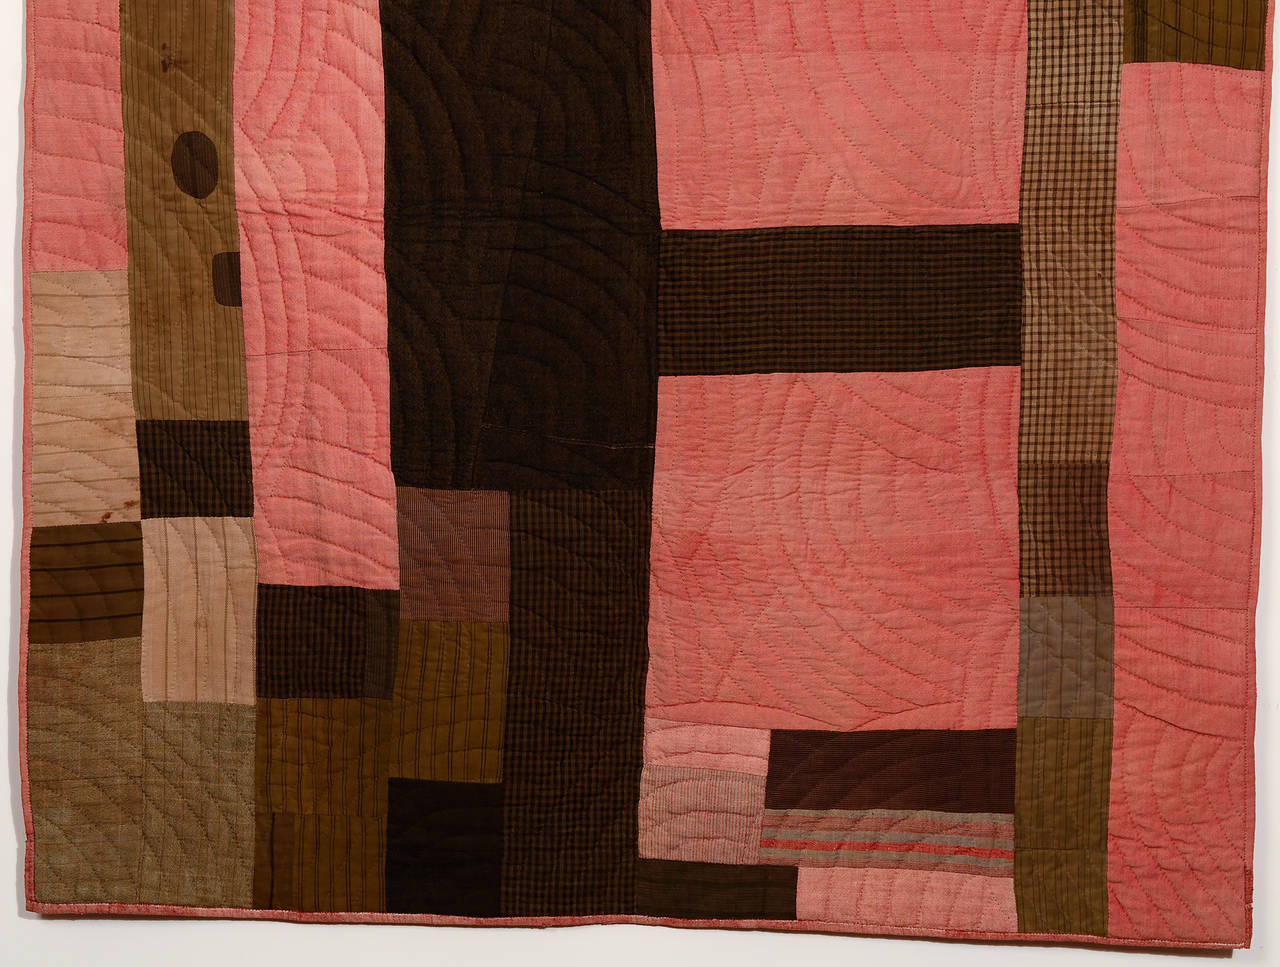 This early wool quilt truly looks like a fabric collage. It is made of a variety of probably homespun coarse wools of solid colors, plaids and stripes. The salmon fabric really pops out against the muted browns. It is quilted with concentric arcs.